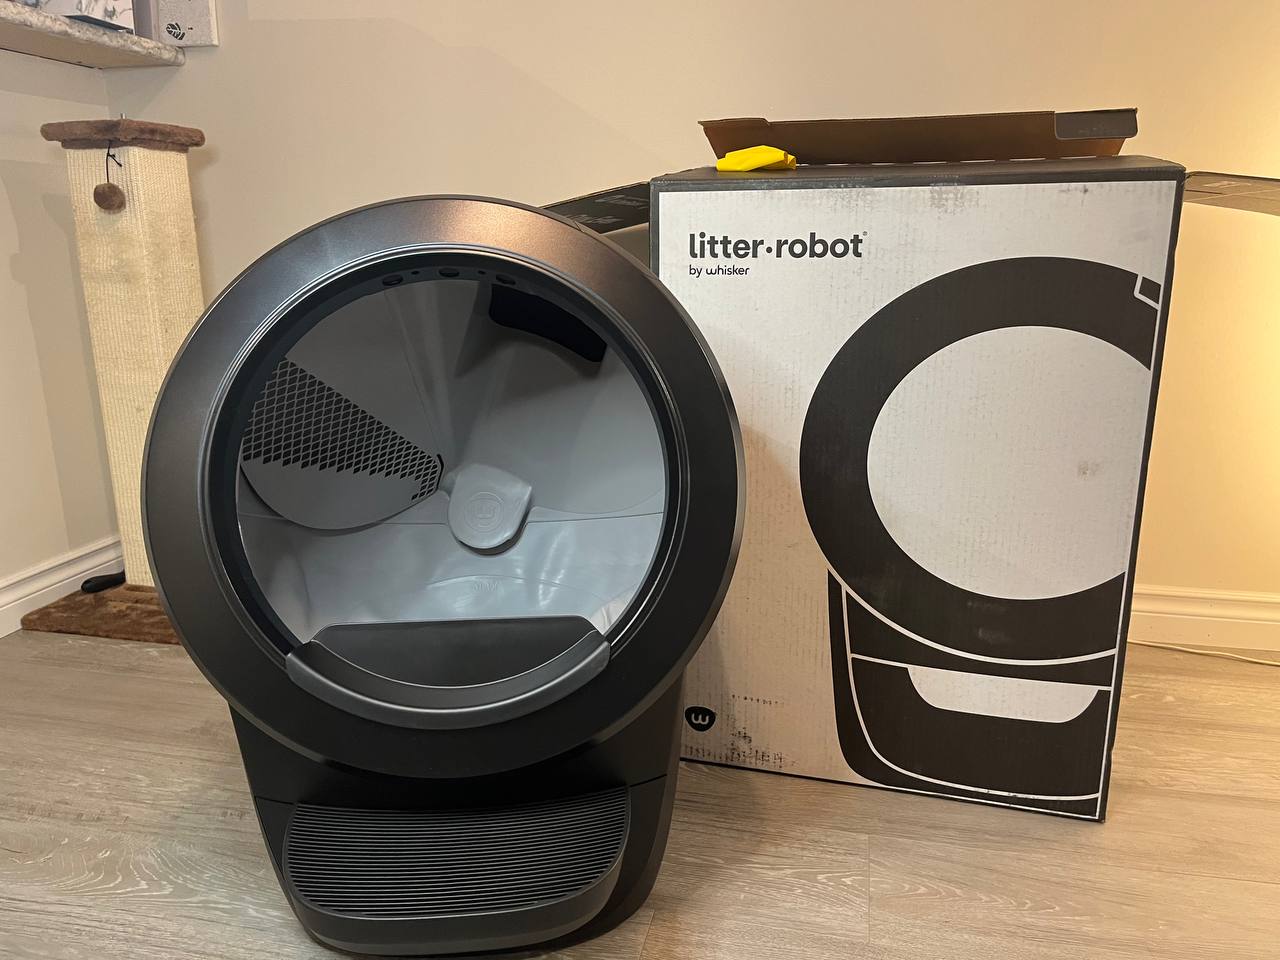 One more unpacked image of Litter Robot 4 device with the original box beside